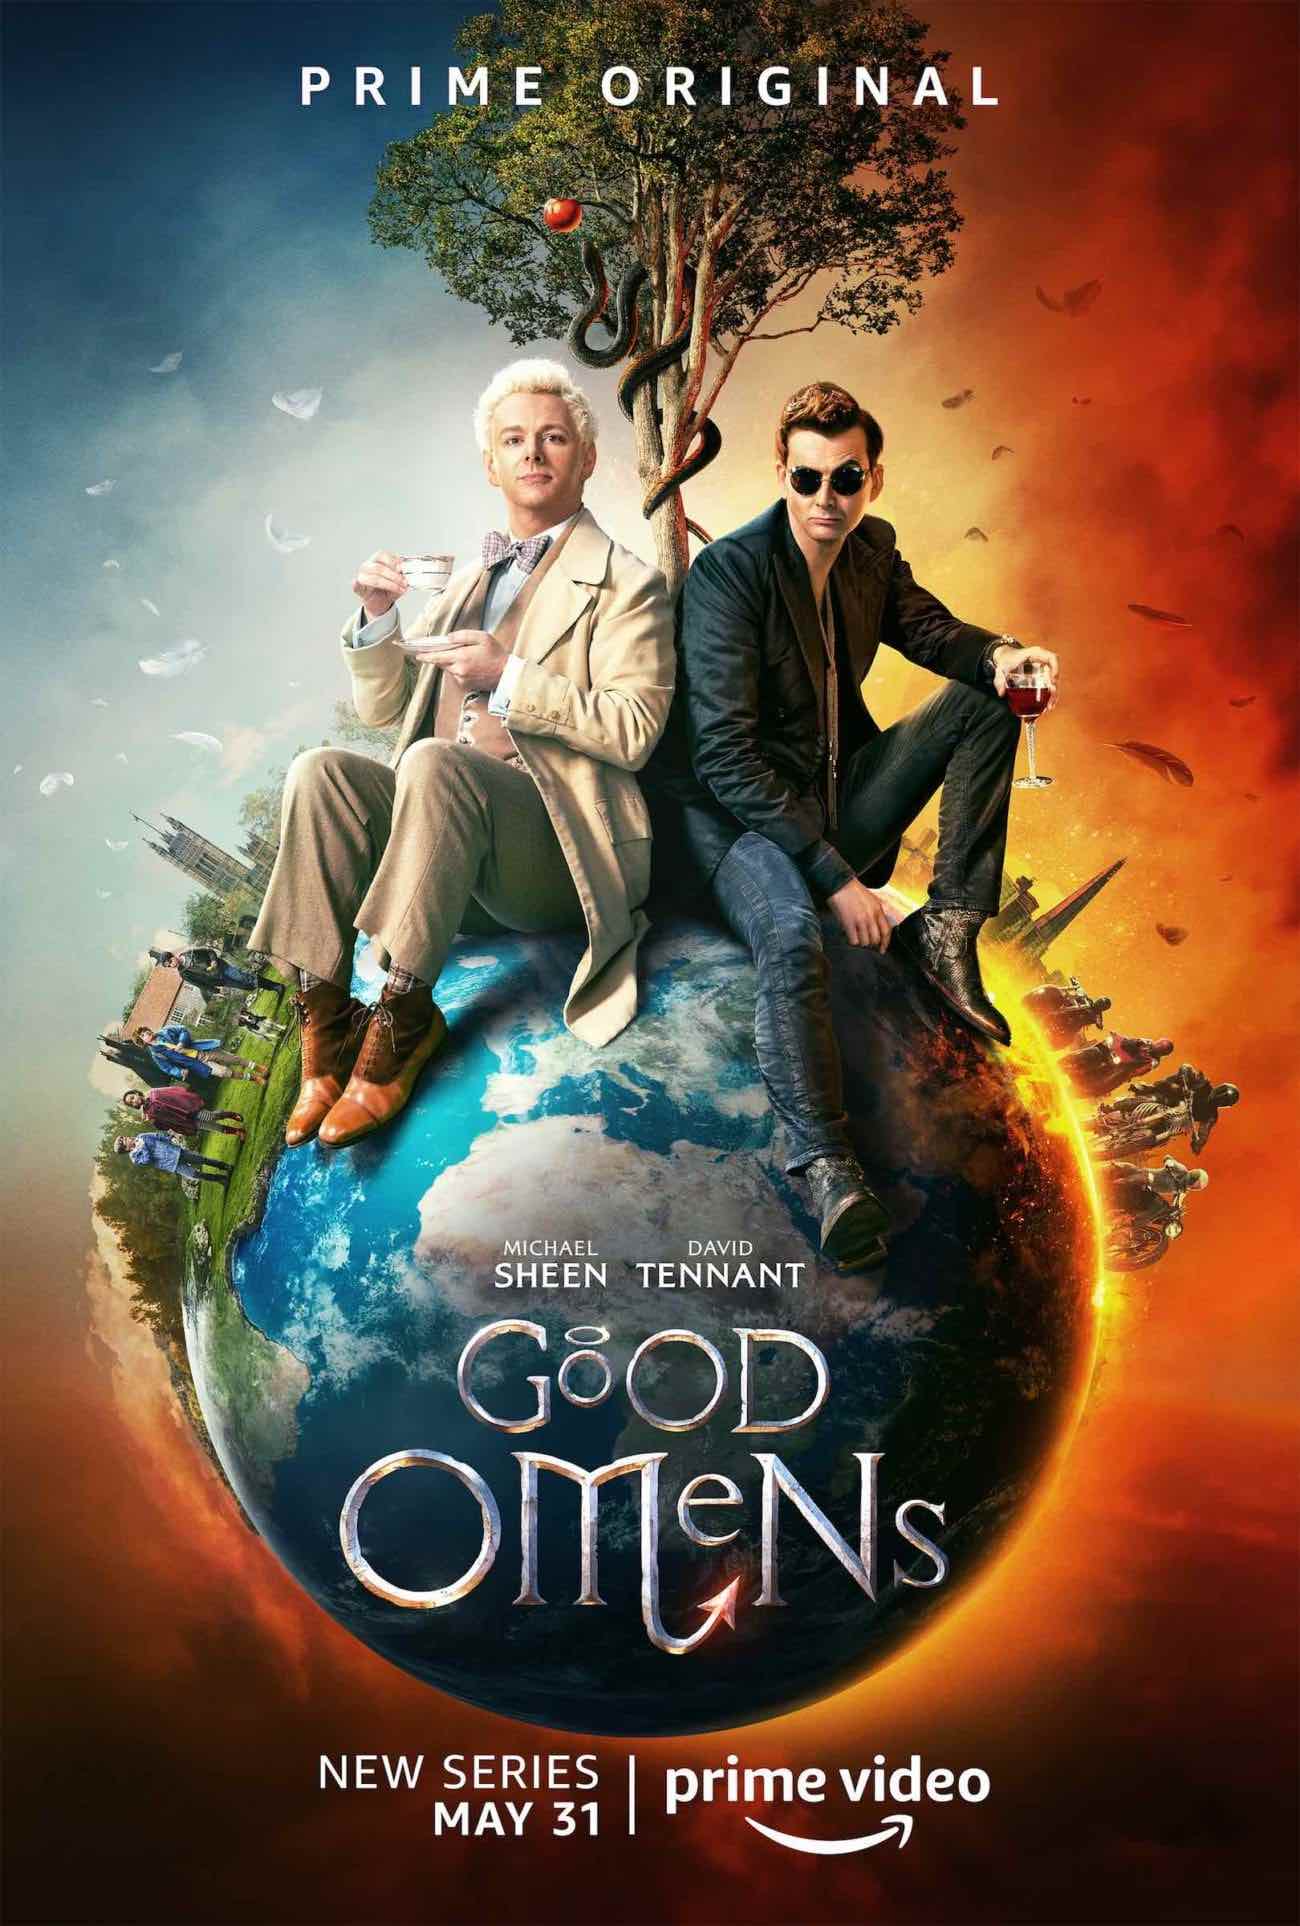 Who knew a friendship between a devil and an angel could be so addictive? Here's why you should vote for 'Good Omens' in our Bingewatch Awards.